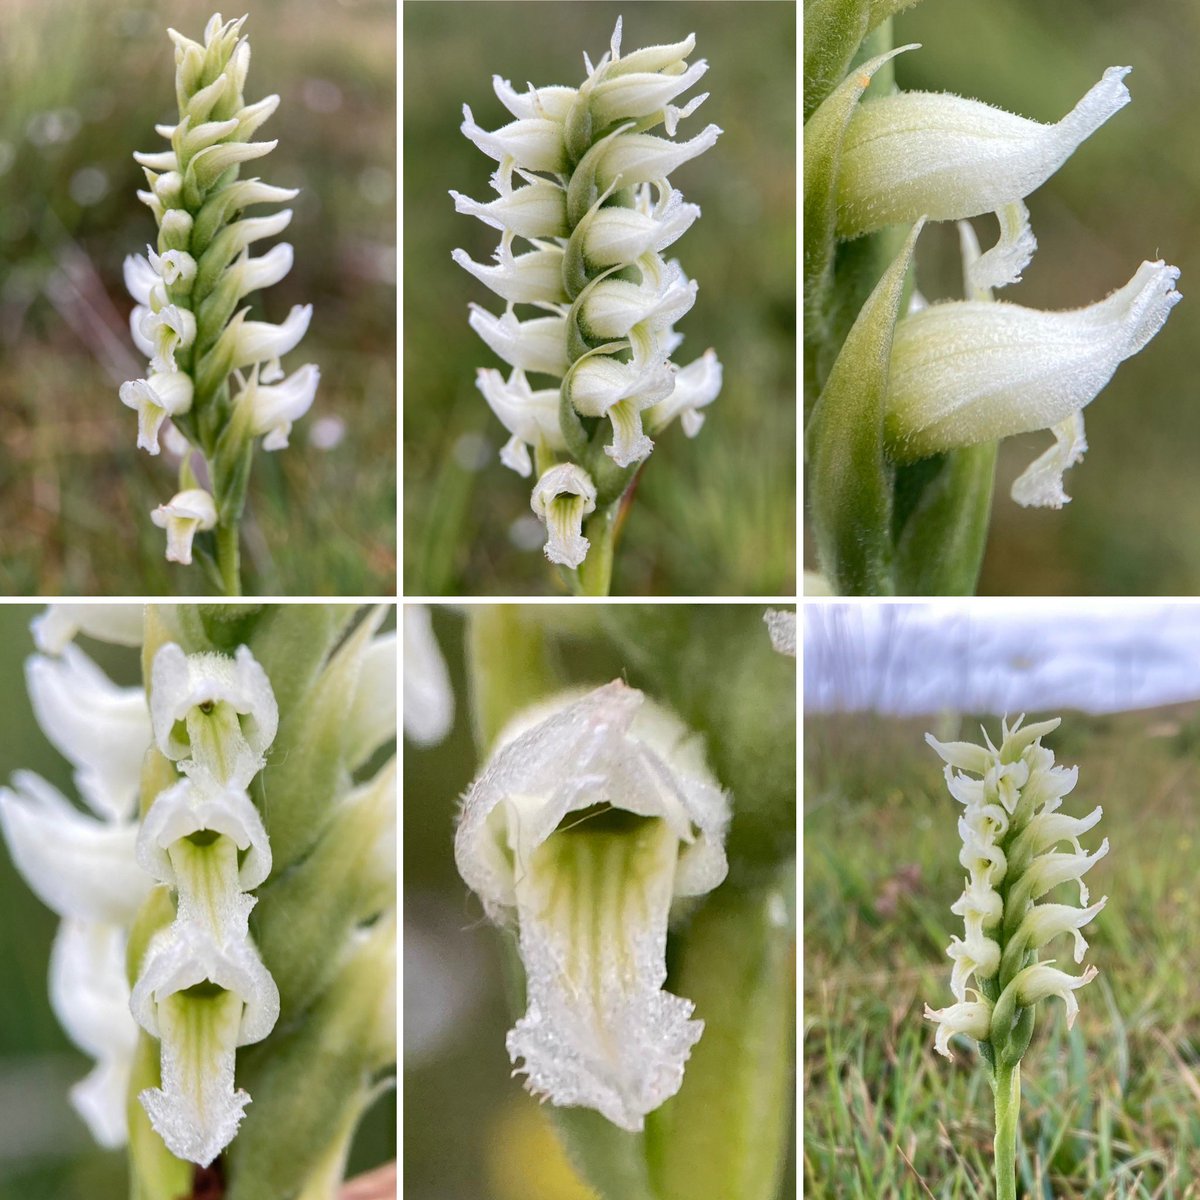 Oh my goodness, what an incredible plant !! Worth braving the wind and rain for the magnificent Irish Lady’s Tresses. Beautiful 🤍 Now Pugsley’s is the only U.K. orchid I haven’t seen - I guess that will have to wait until next year now… #orchid